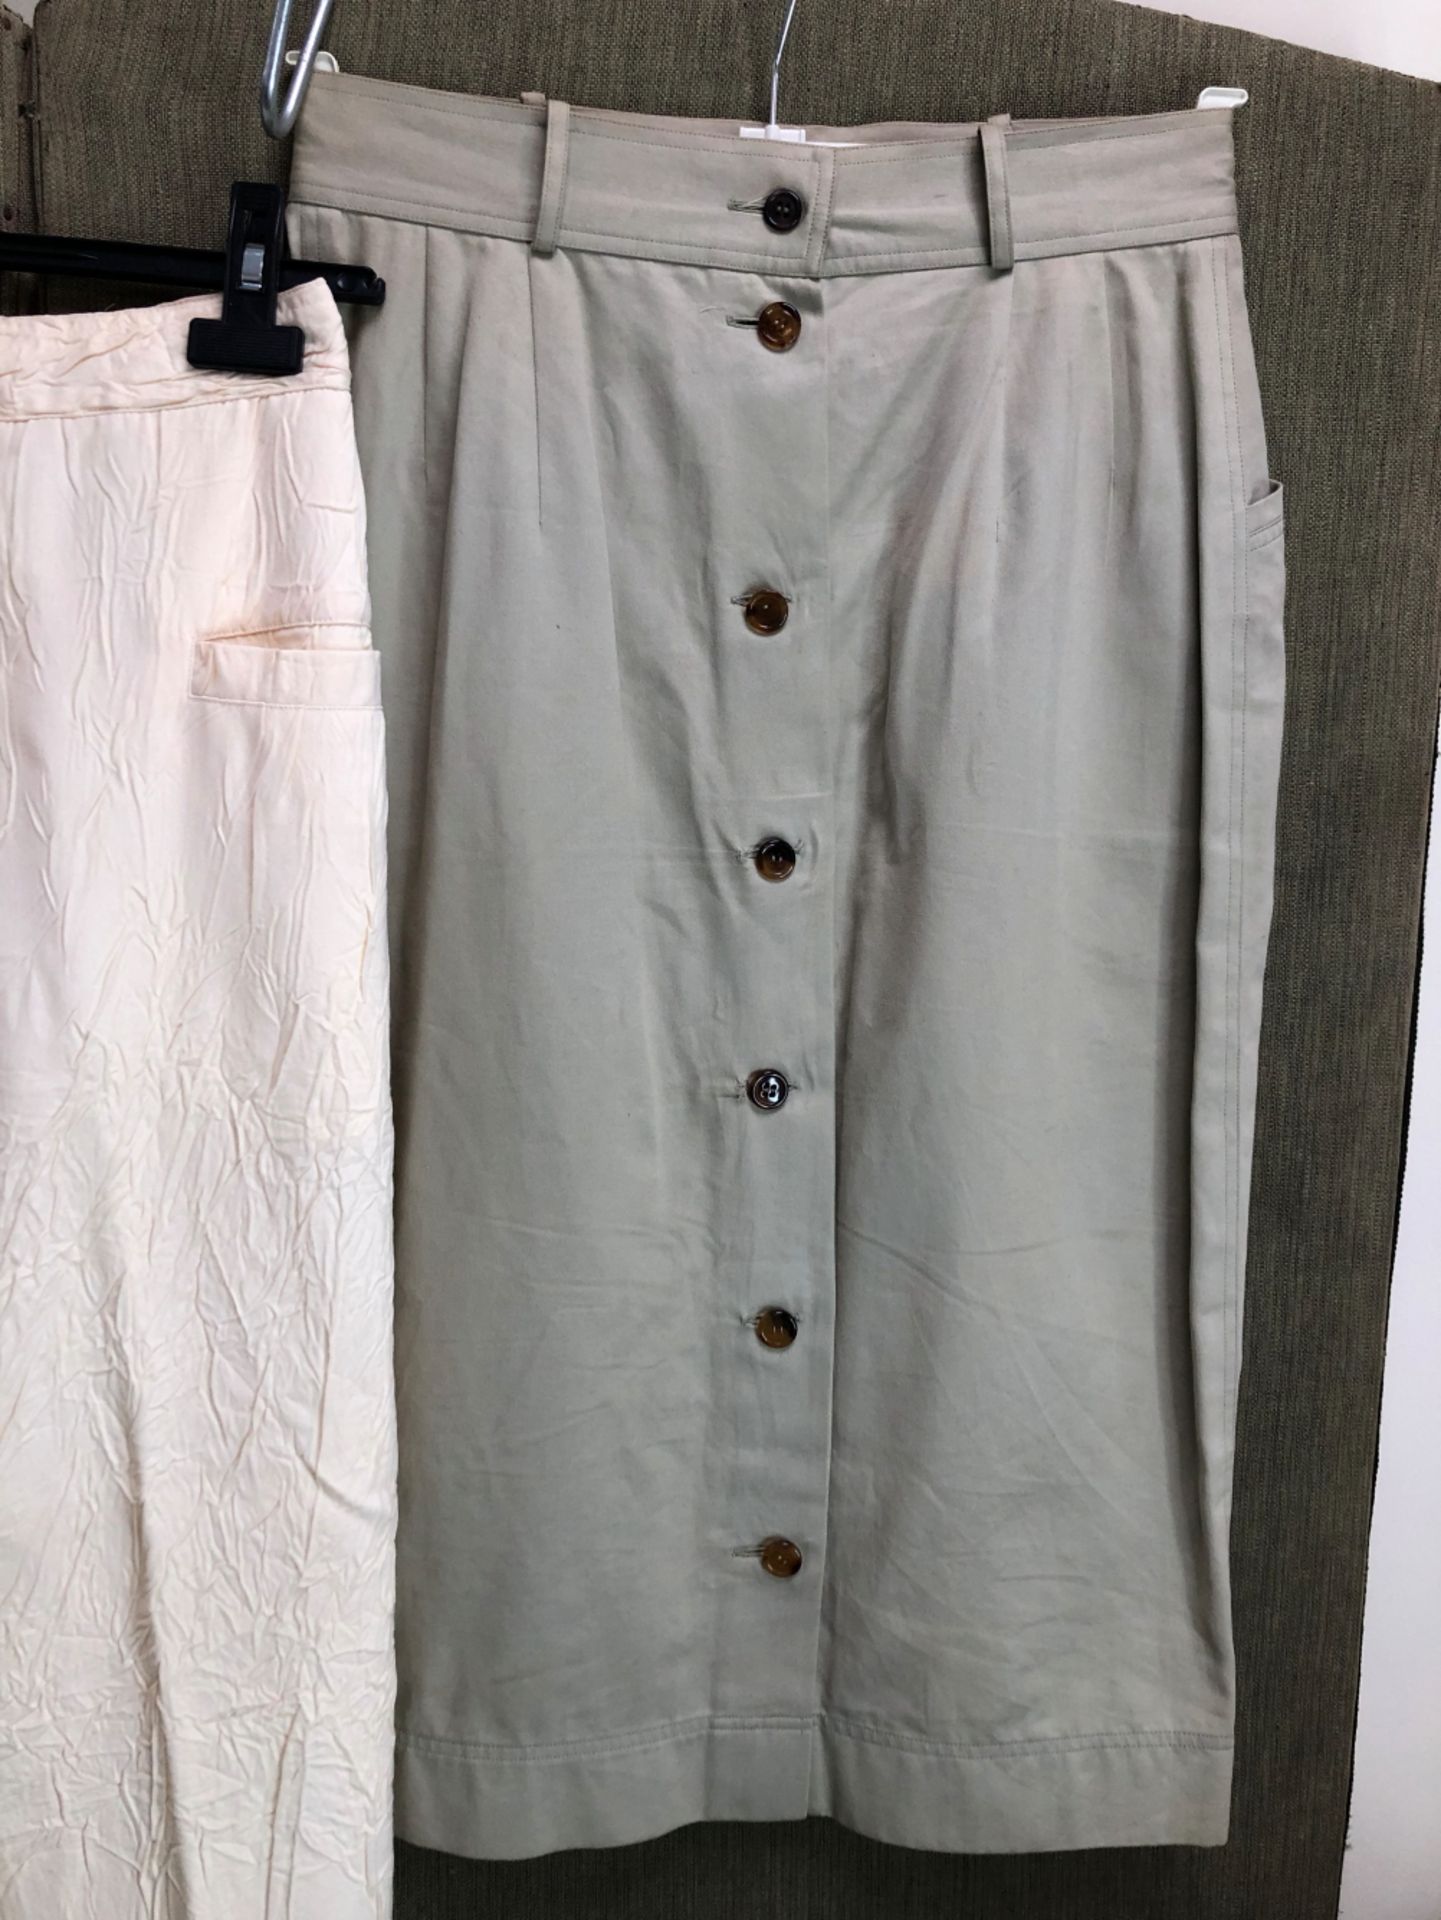 AN ISTANTE ITALY CREAM TROUSER SUIT SIZE 44, TOGETHER WITH A 100% COTTON SALVATORE FERRAGAMO - Image 4 of 13